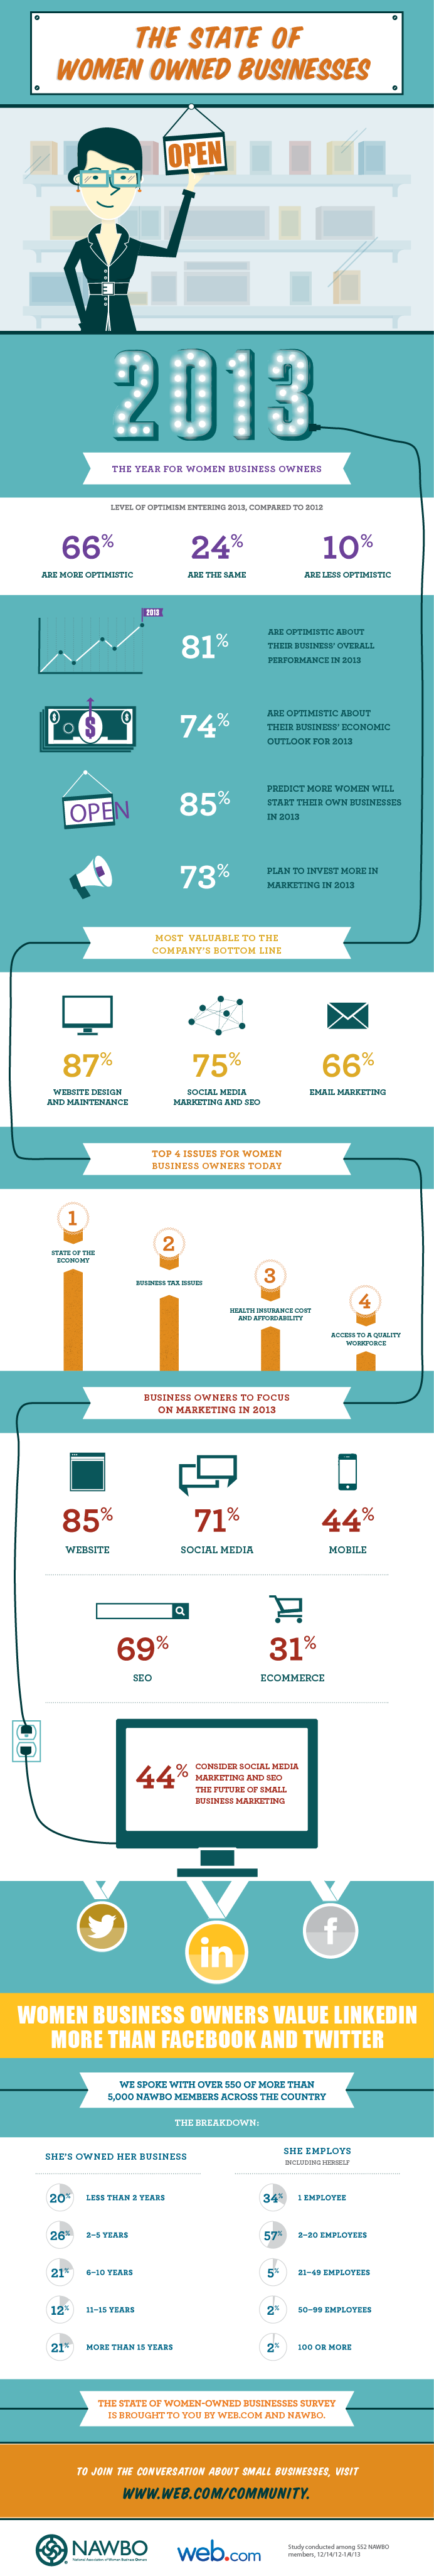 wp content/uploads/// state of women owned businesses infographic